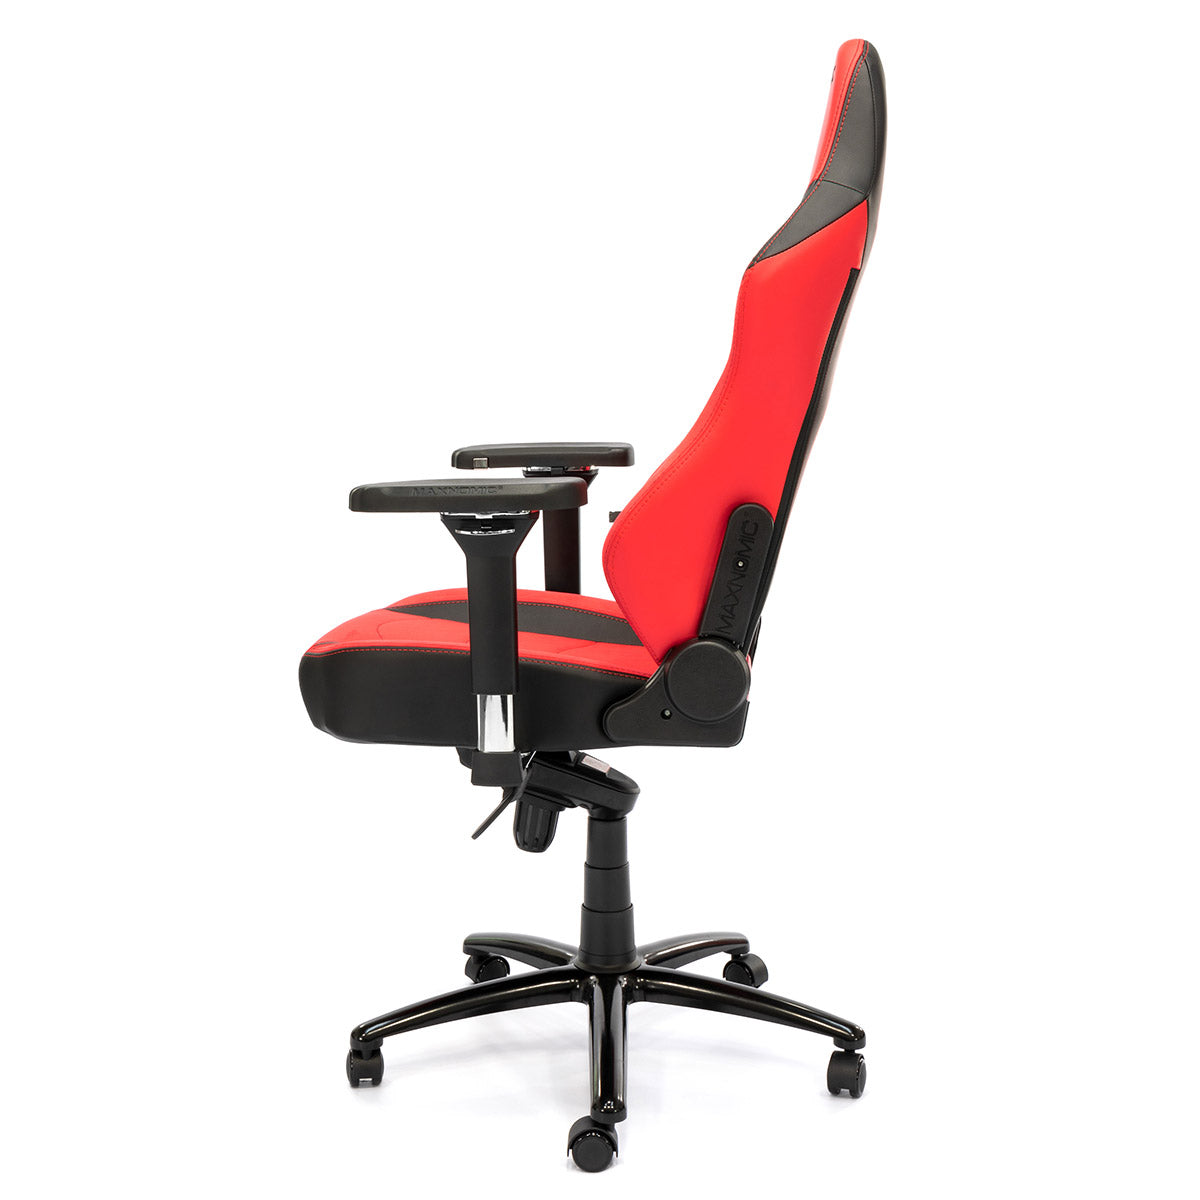 MAXNOMIC® Leader Red Executive Edition